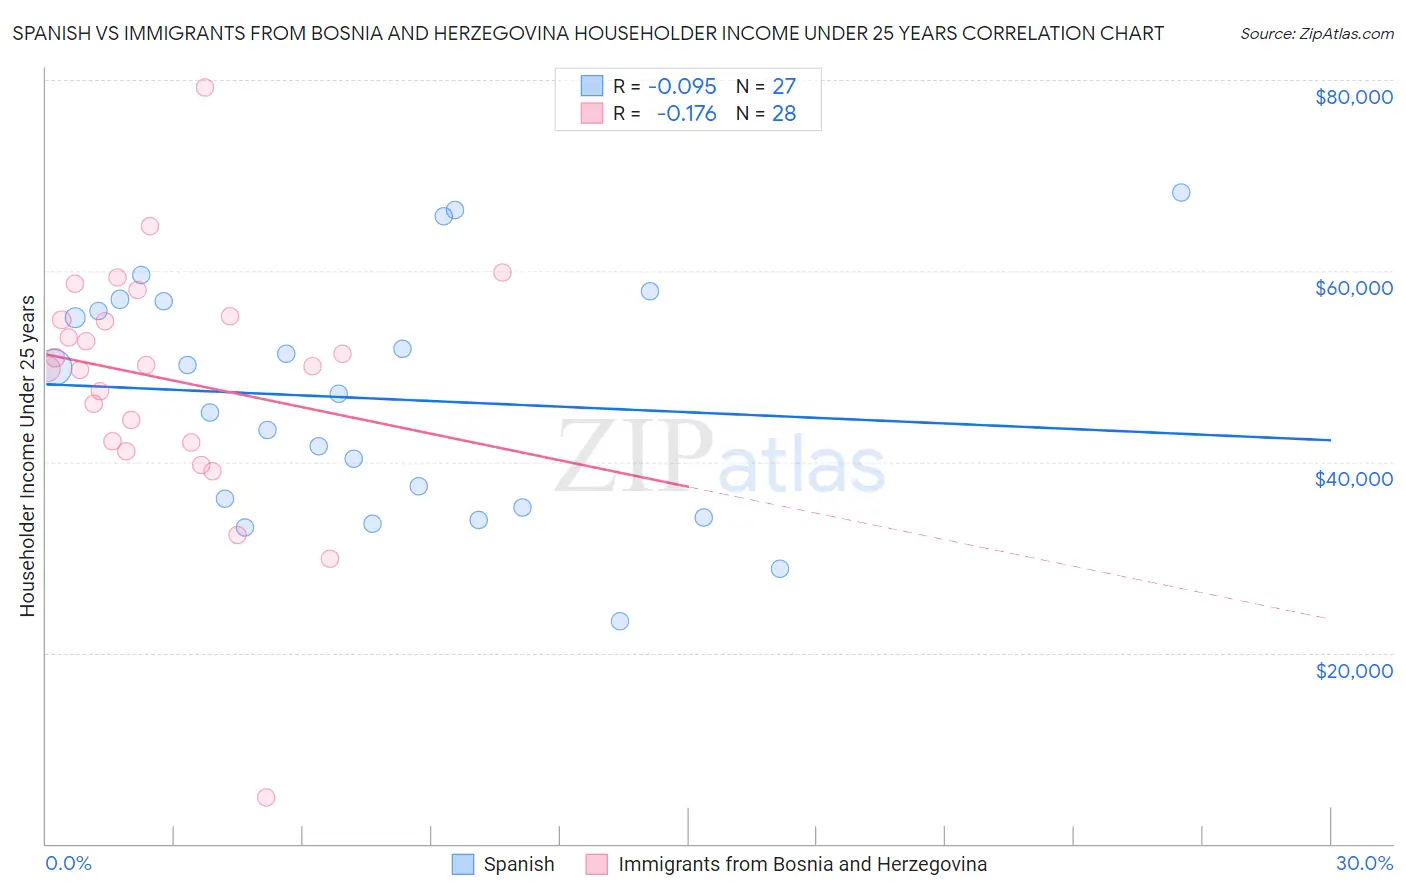 Spanish vs Immigrants from Bosnia and Herzegovina Householder Income Under 25 years